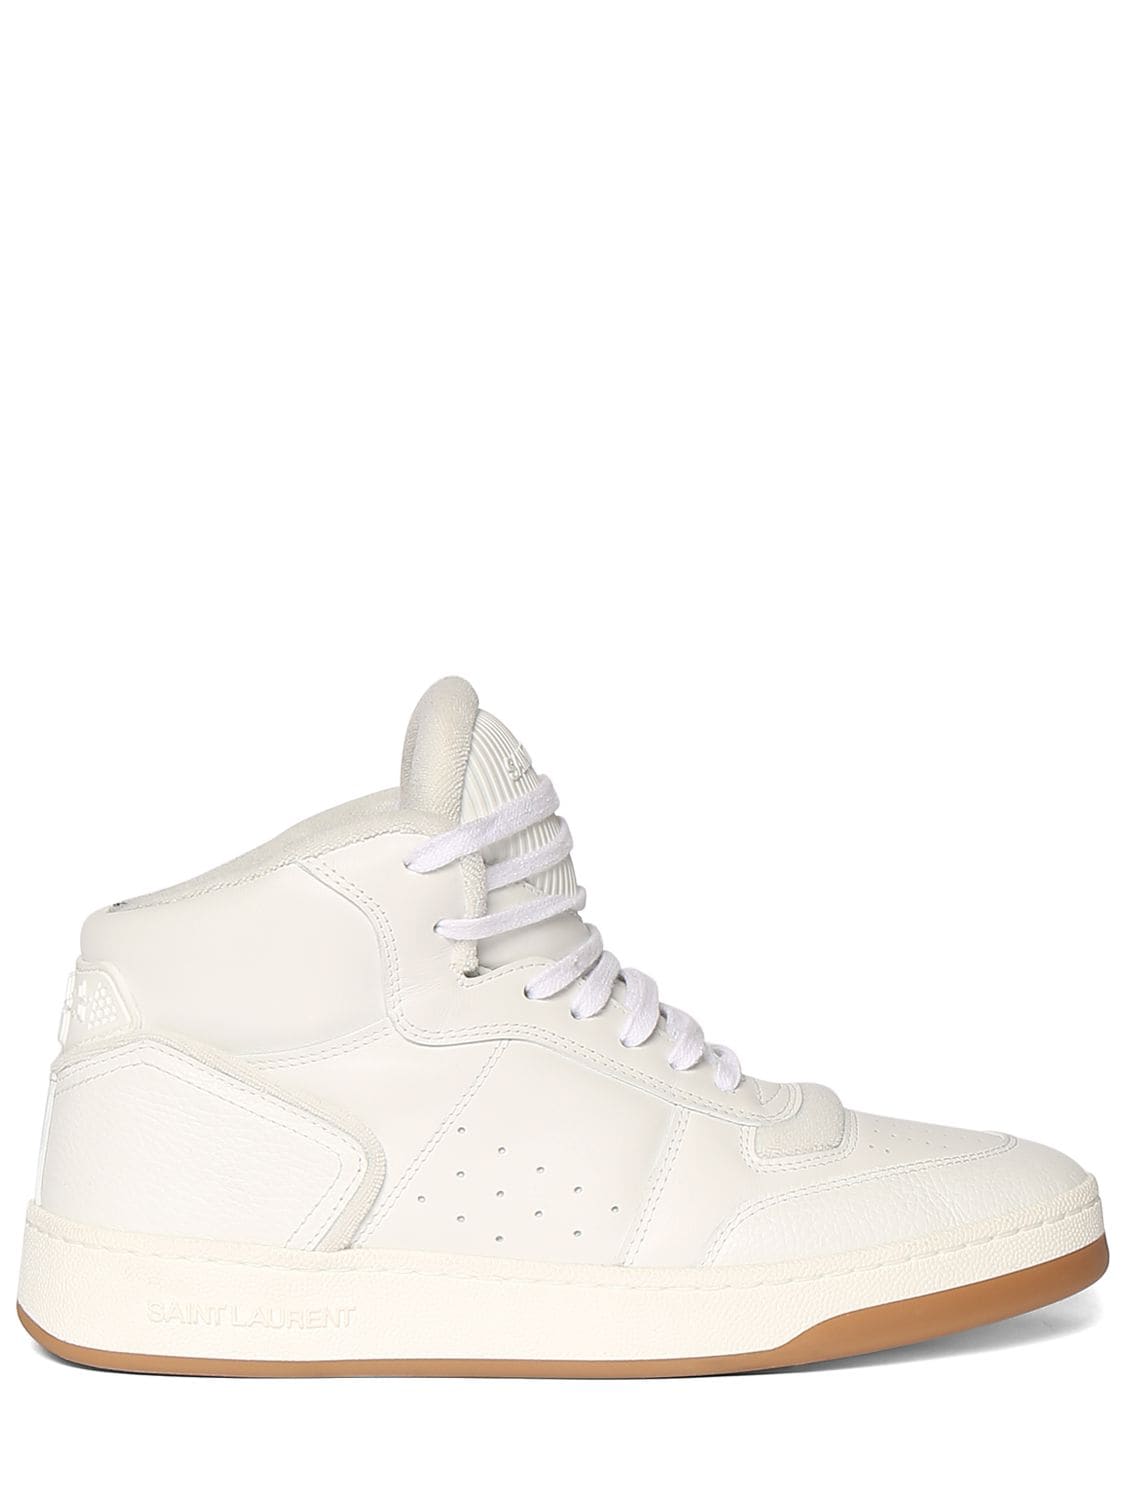 Image of Sl/80 Leather Mid Top Sneakers